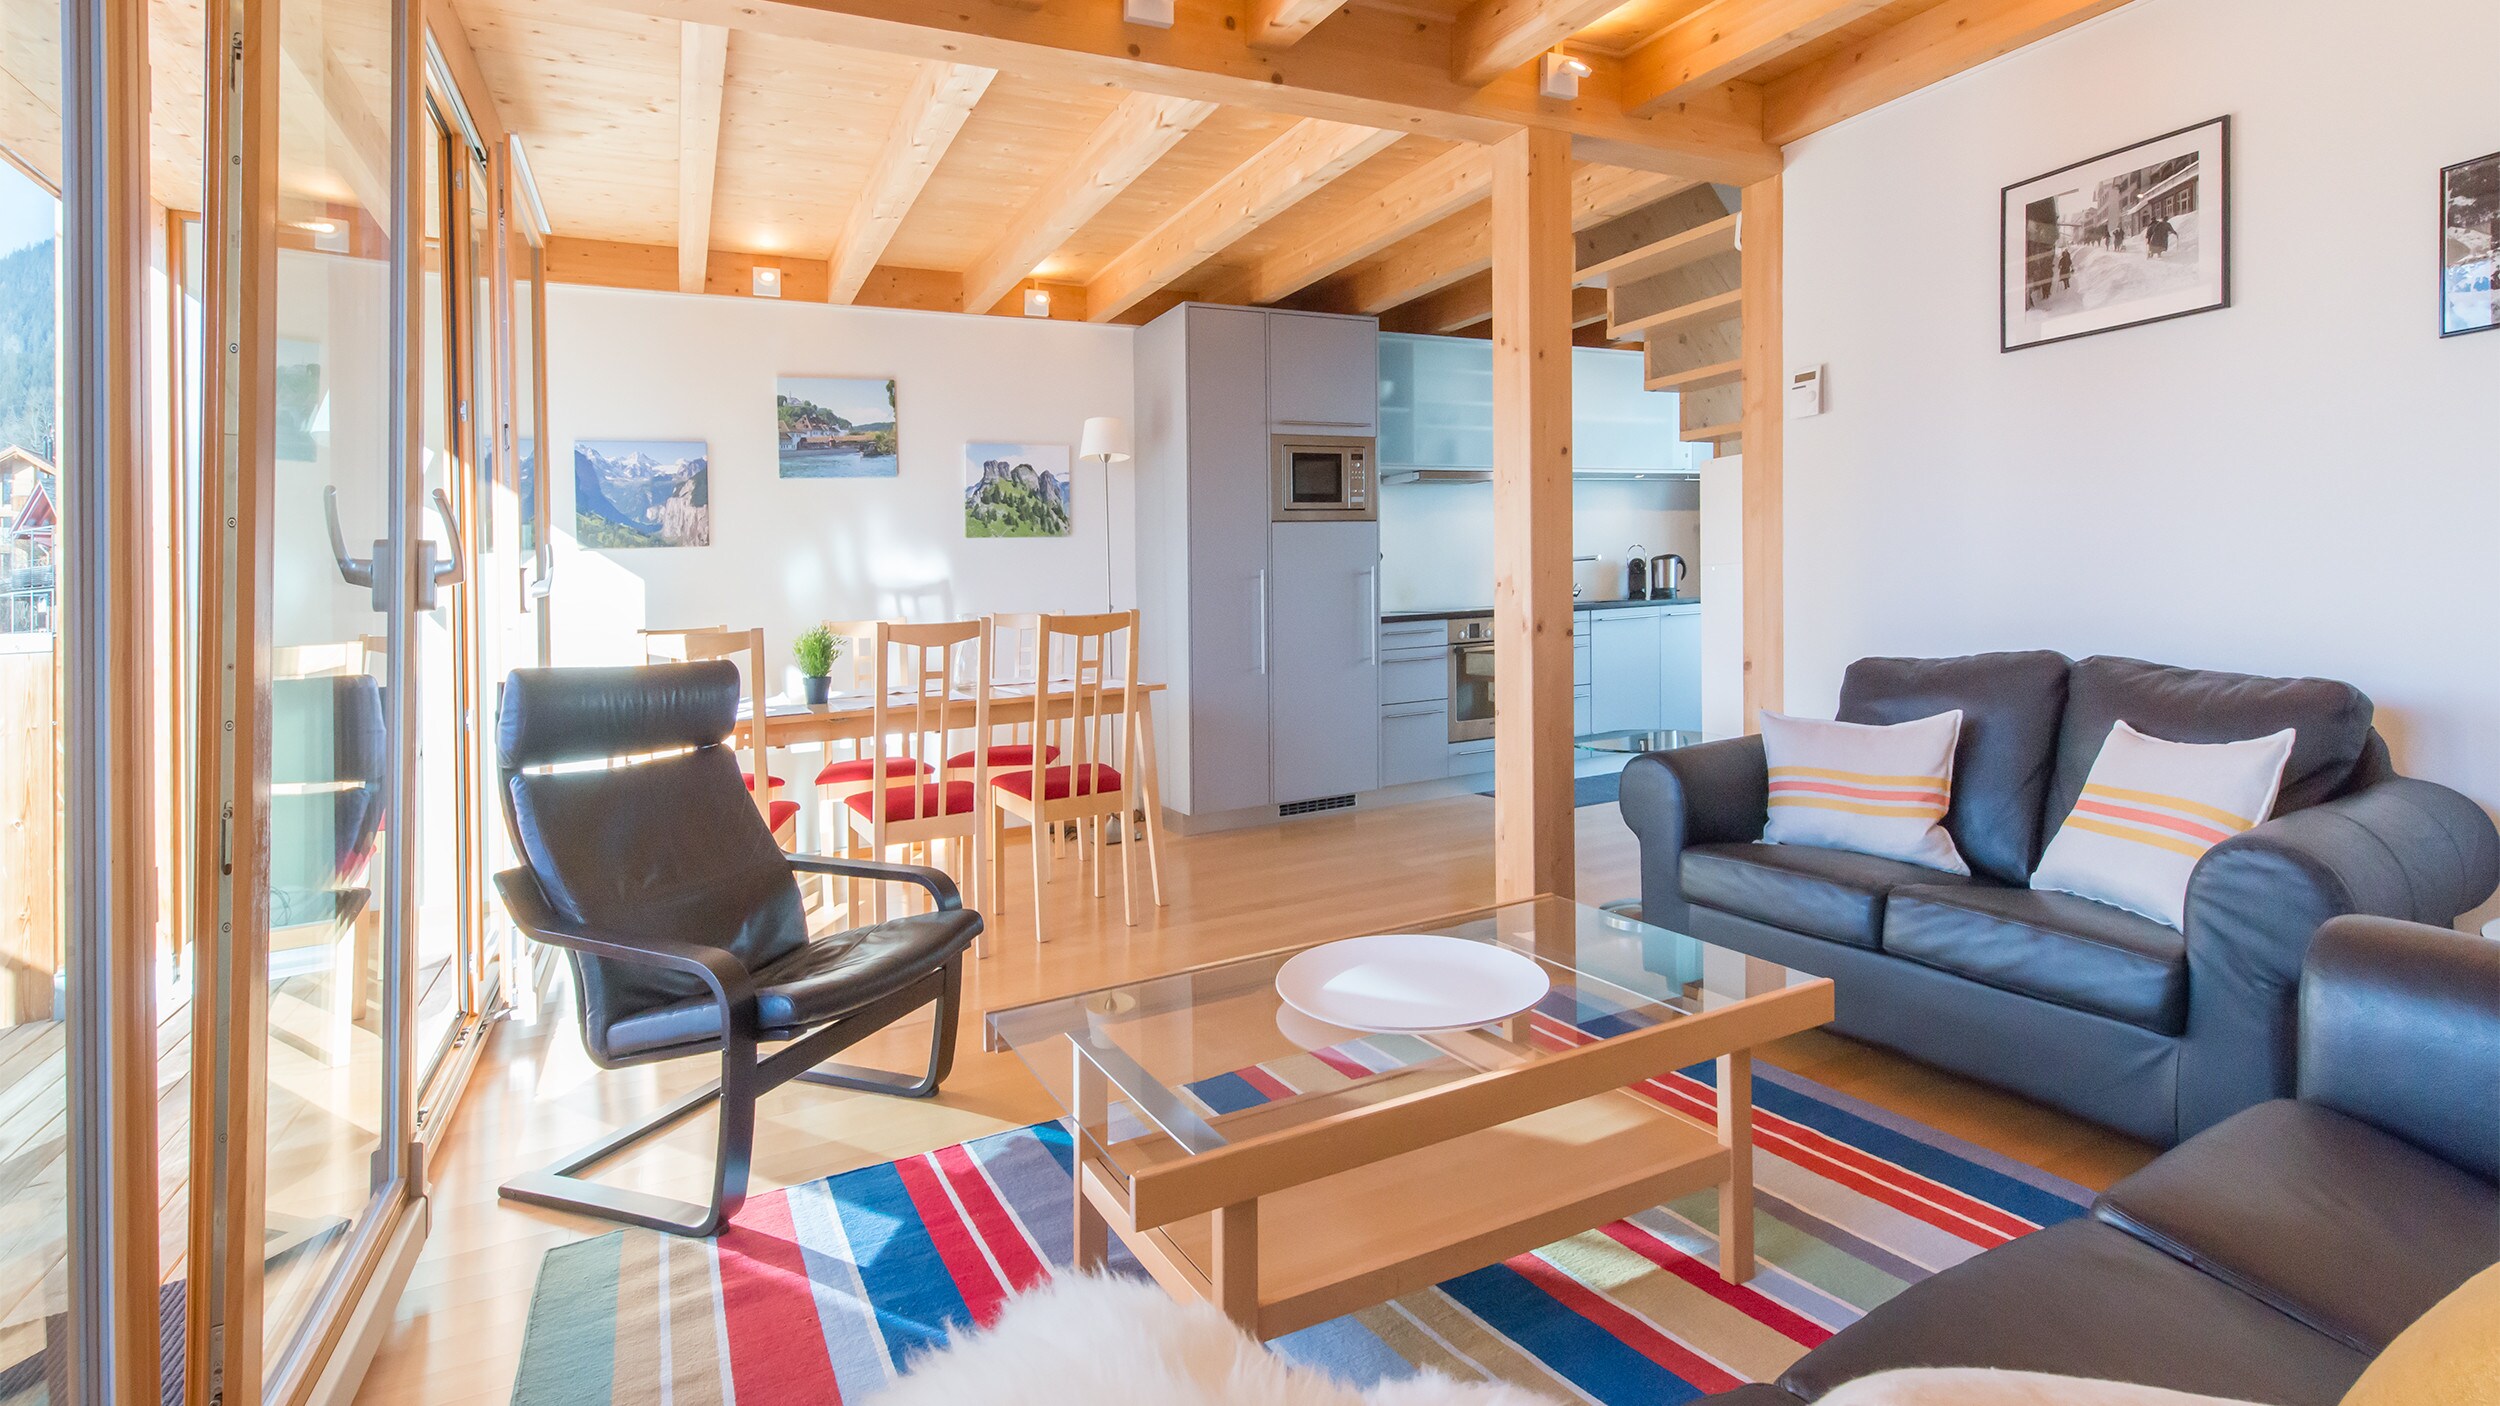 Penthouse Apartment 5 in Chalet Roossi. Book now with Alpine Holiday Services Property Management in Wengen.